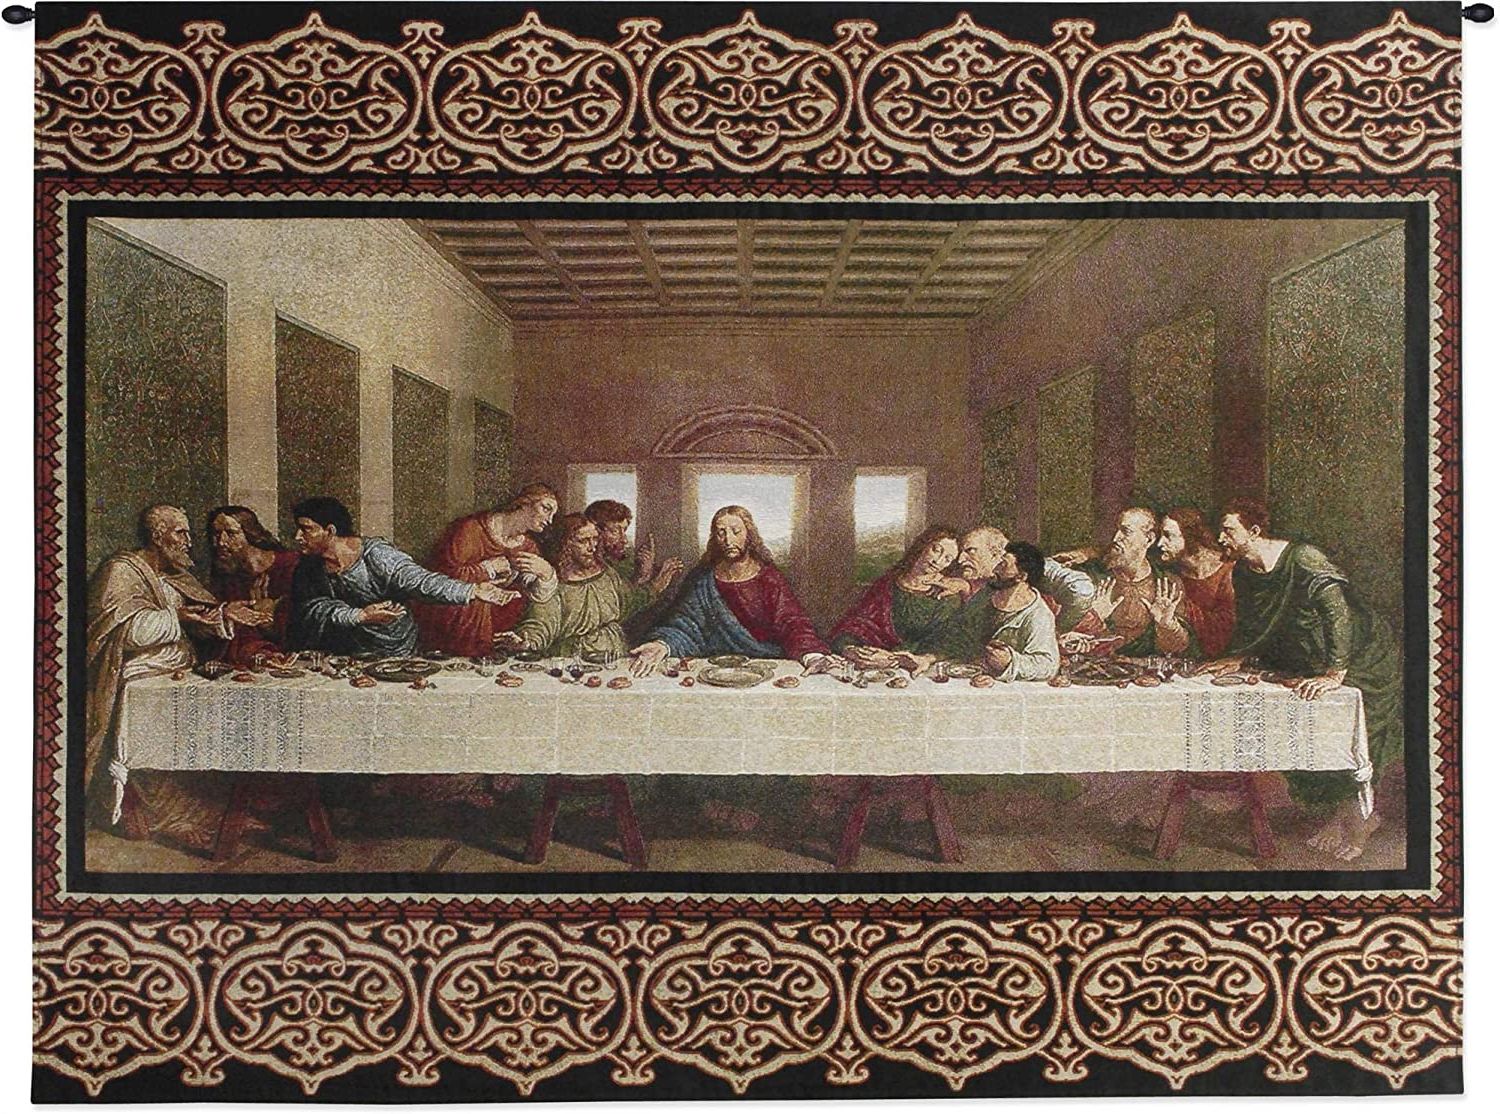 [%the Last Supperleonardo Da Vinci | Woven Tapestry Wall Art Hanging |  Religious Inspirational Jesus Last Supper | 100% Cotton Usa Size 53x40 In Fashionable Blended Fabric Leonardo Davinci The Last Supper Wall Hangings|blended Fabric Leonardo Davinci The Last Supper Wall Hangings In Most Current The Last Supperleonardo Da Vinci | Woven Tapestry Wall Art Hanging |  Religious Inspirational Jesus Last Supper | 100% Cotton Usa Size 53x40|well Liked Blended Fabric Leonardo Davinci The Last Supper Wall Hangings Within The Last Supperleonardo Da Vinci | Woven Tapestry Wall Art Hanging |  Religious Inspirational Jesus Last Supper | 100% Cotton Usa Size 53x40|most Popular The Last Supperleonardo Da Vinci | Woven Tapestry Wall Art Hanging |  Religious Inspirational Jesus Last Supper | 100% Cotton Usa Size 53x40 With Blended Fabric Leonardo Davinci The Last Supper Wall Hangings%] (View 6 of 20)